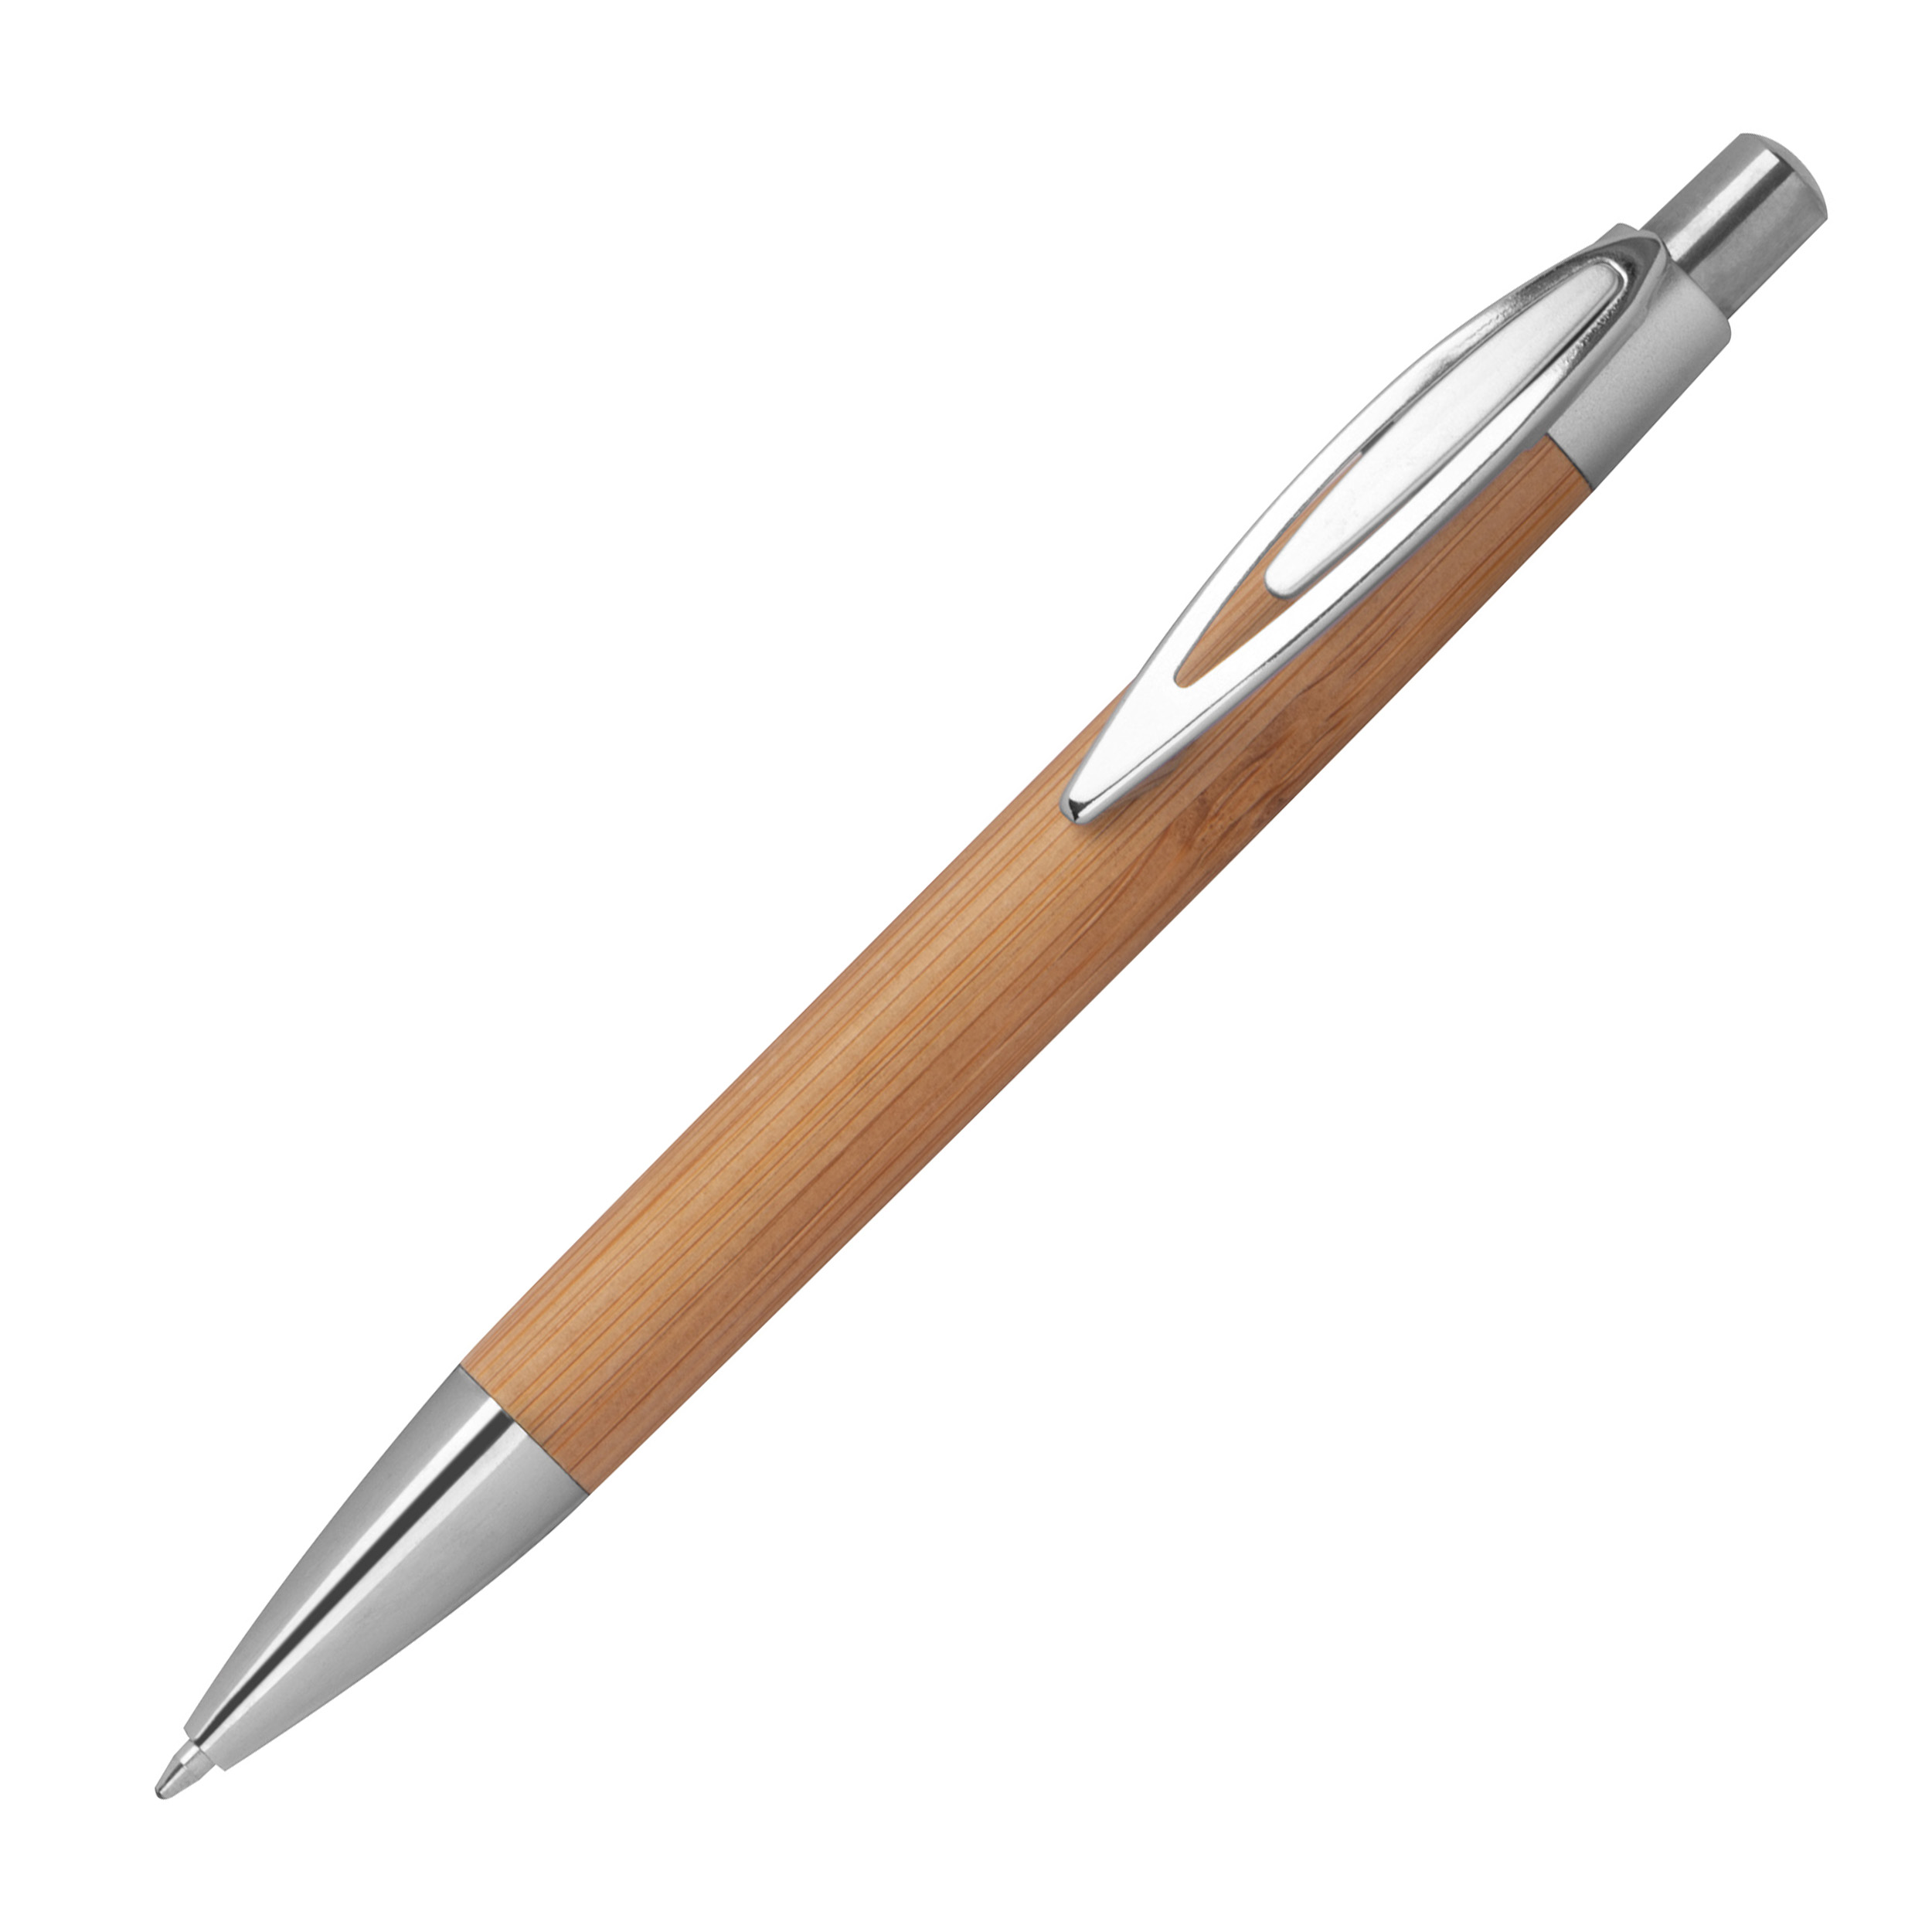 A ballpoint pen in silver colour, covered with a layer of bamboo - Otley